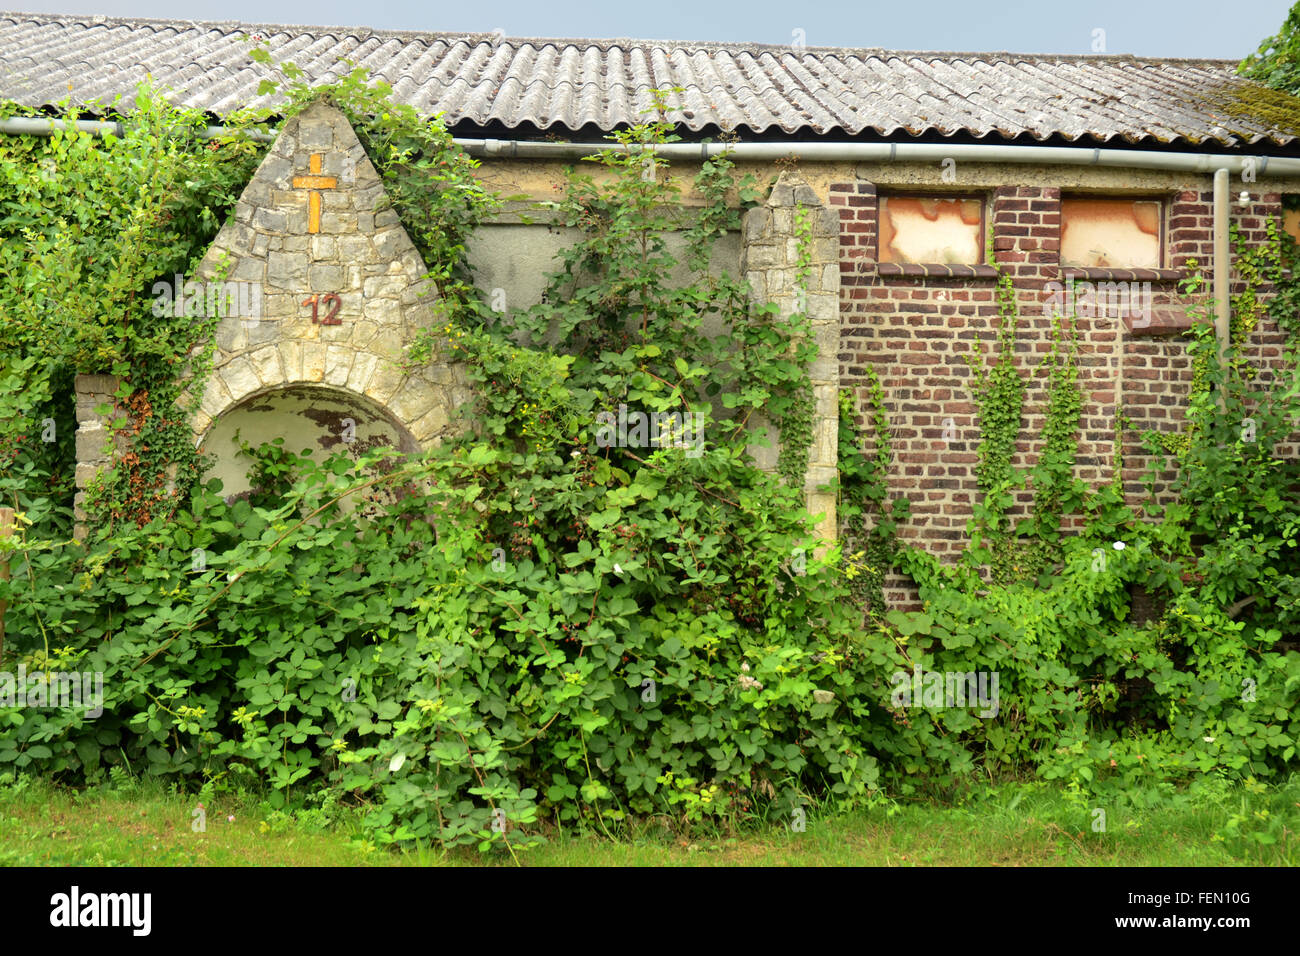 Remnants of the garden of an old cloister, on the Sittarderweg in Heerlen in the Limburg province of the Netherlands. Stock Photo